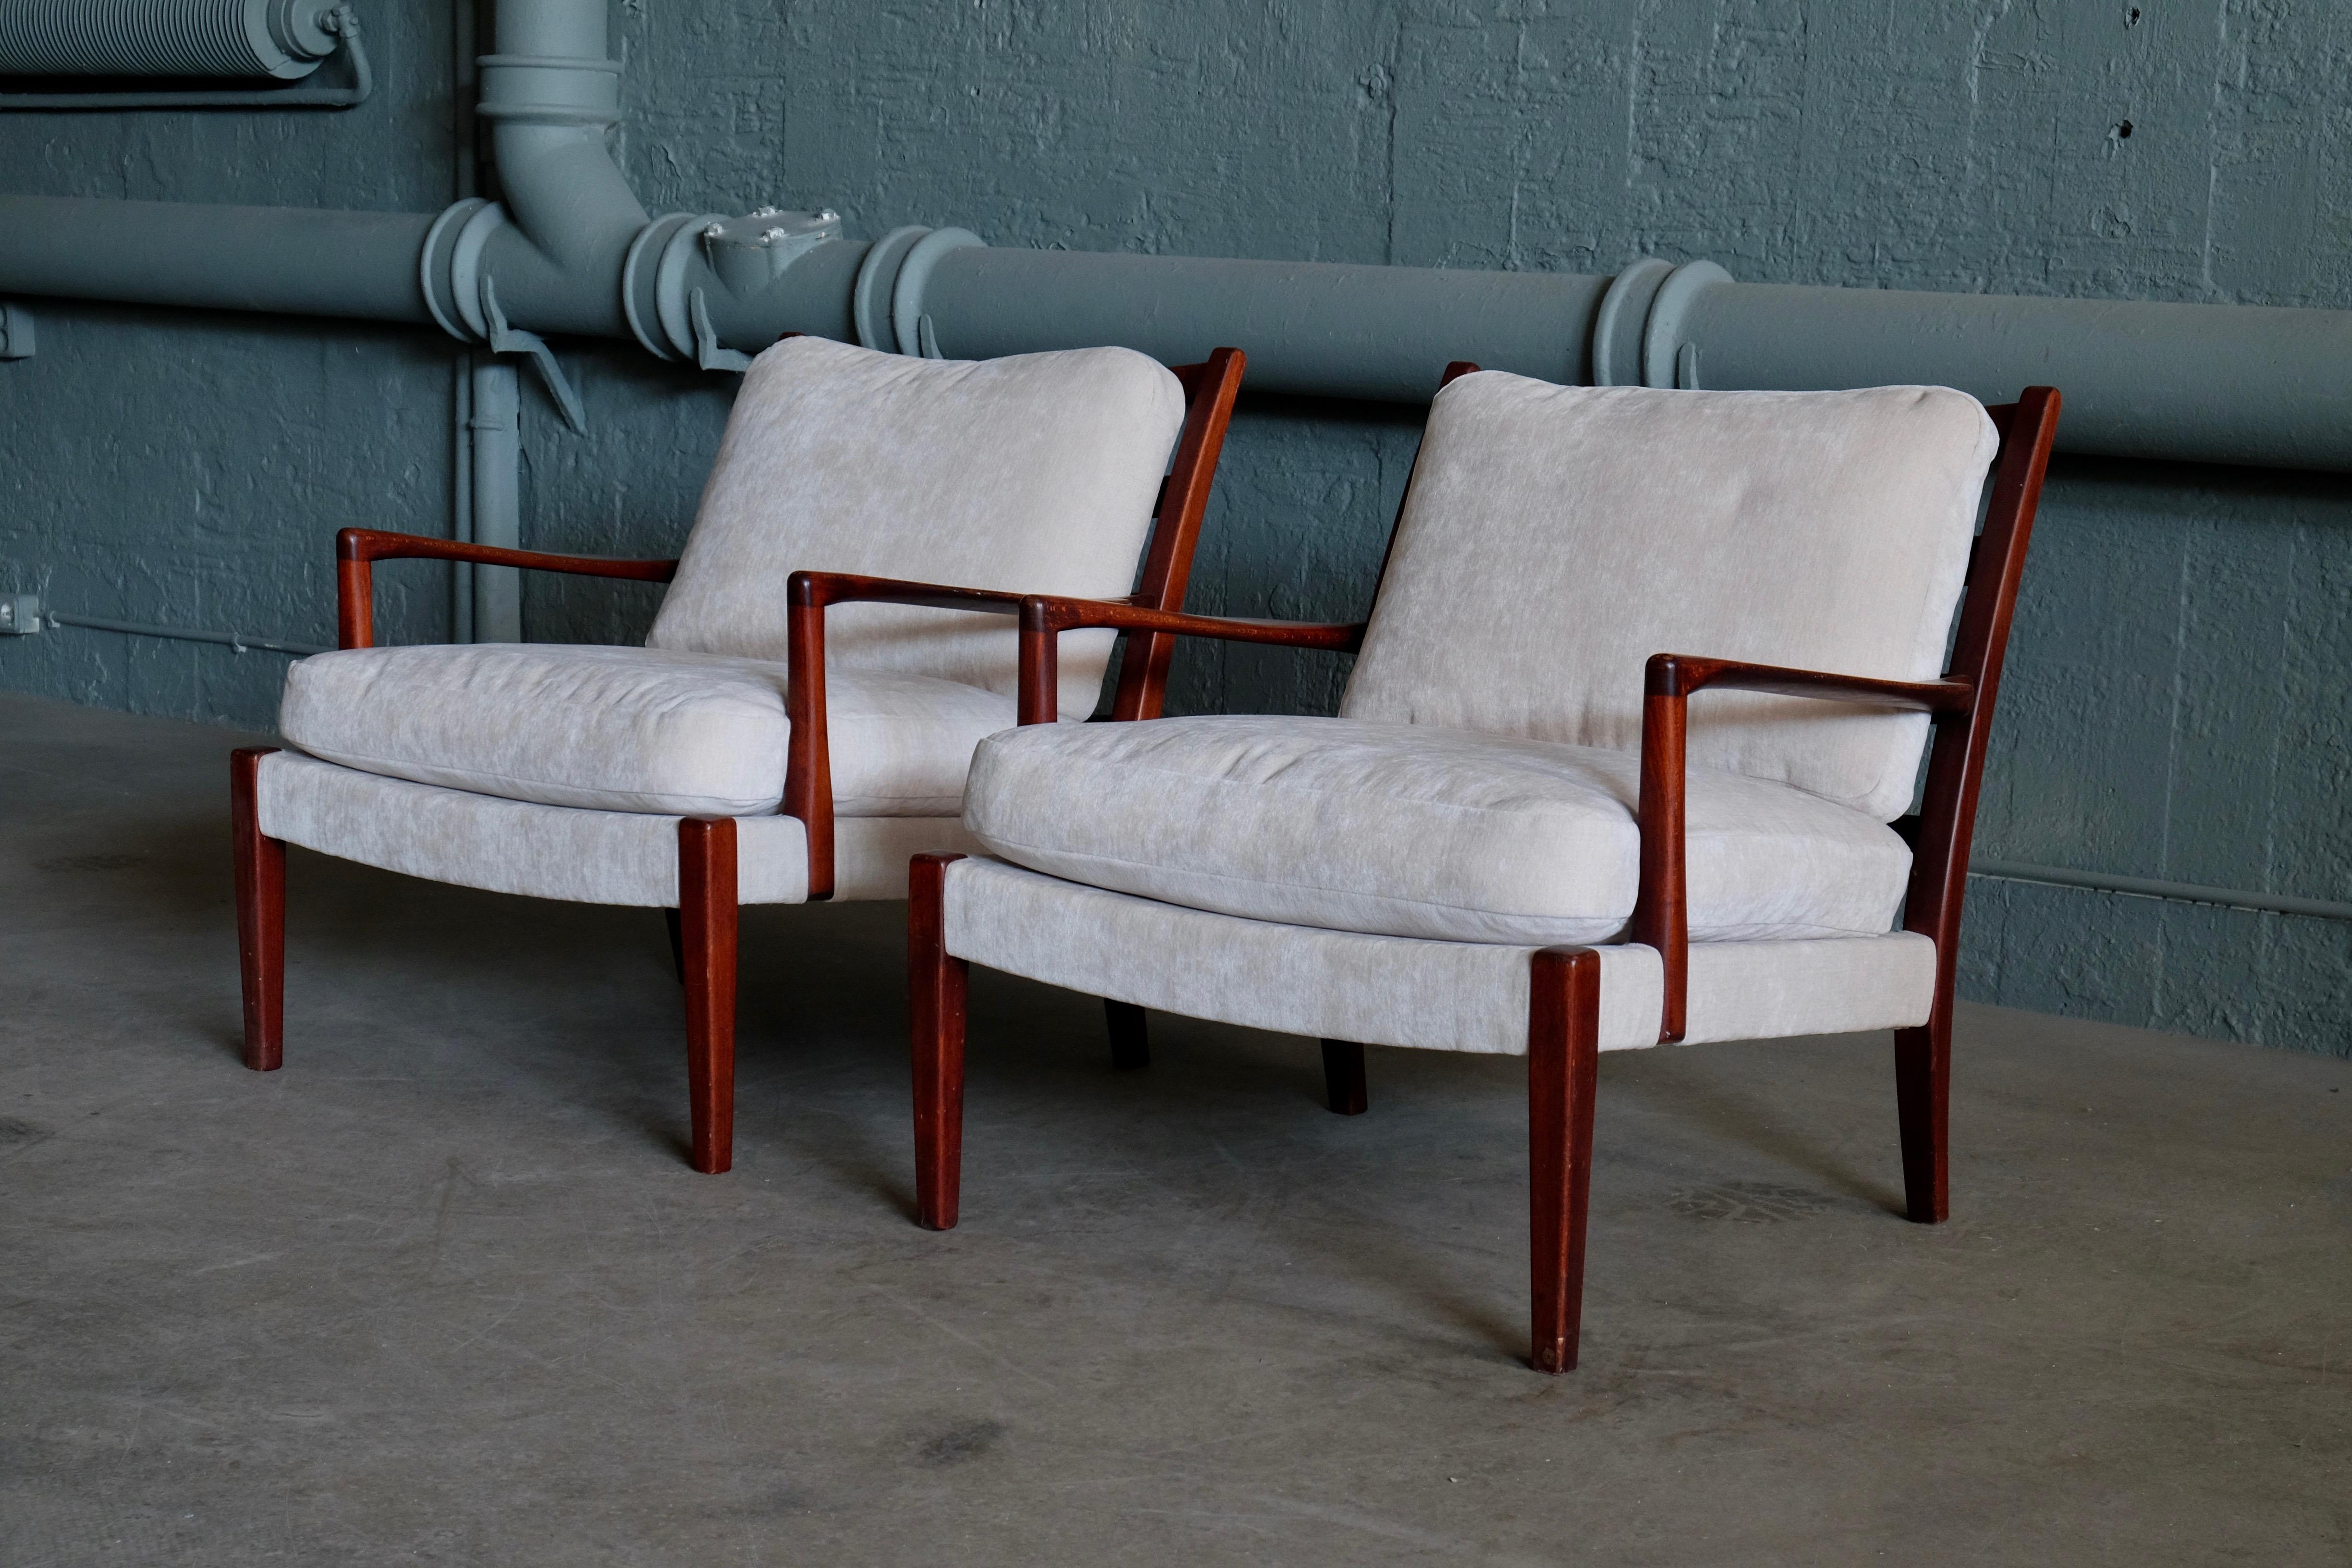 Easy chairs model Löven designed by Arne Norell. Produced by Arne Norell AB in Aneby, Sweden, 1960s.
Reupholstered.